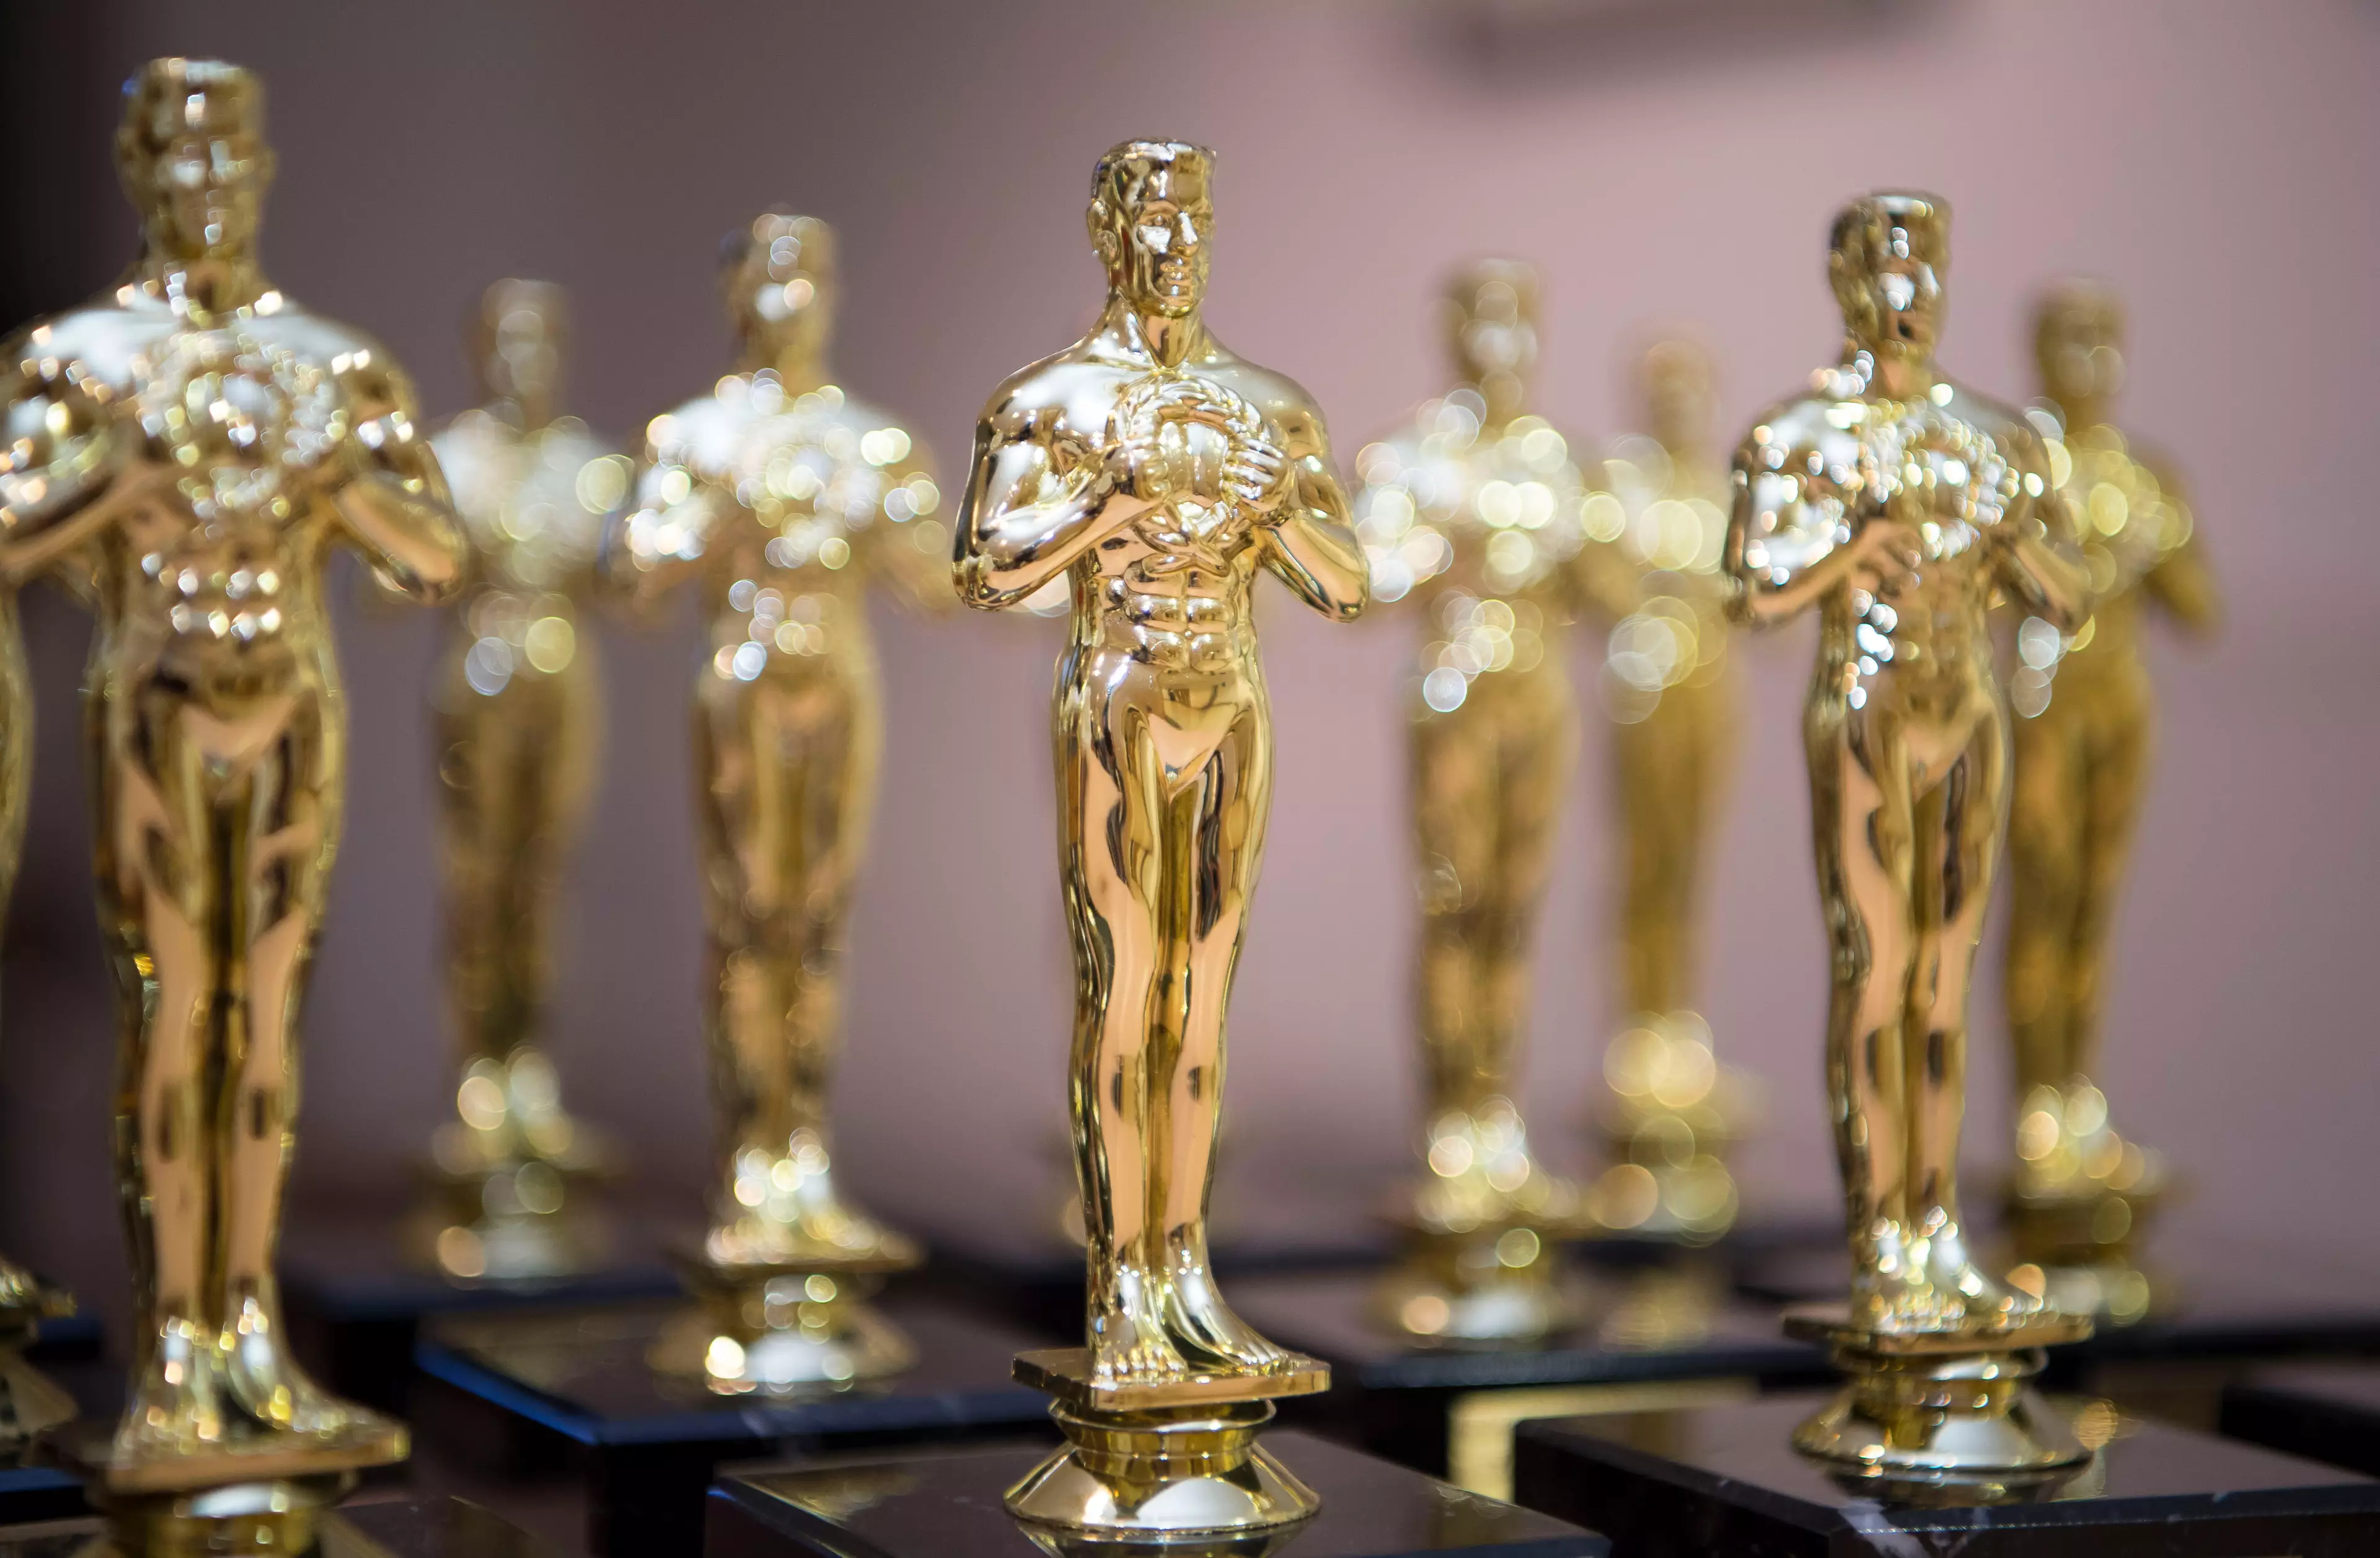 Oscar nominees will receive goody bags. (